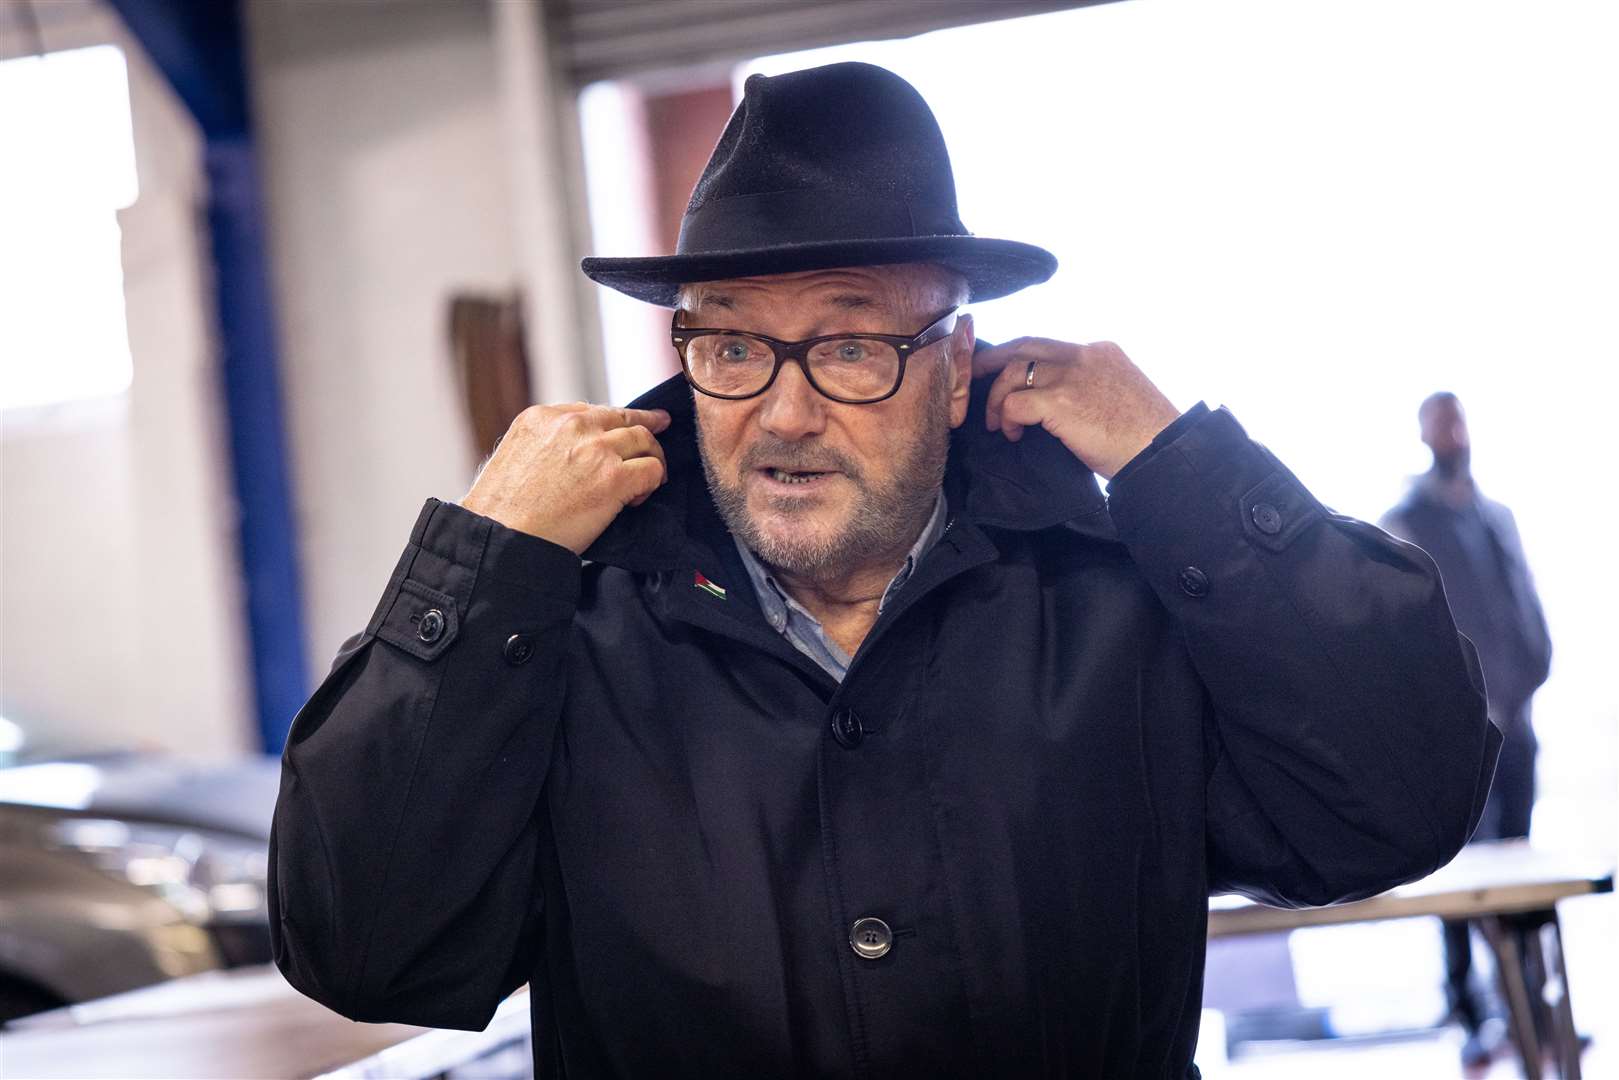 George Galloway is a divisive figure known for his fiery rhetoric (James Speakman/PA)